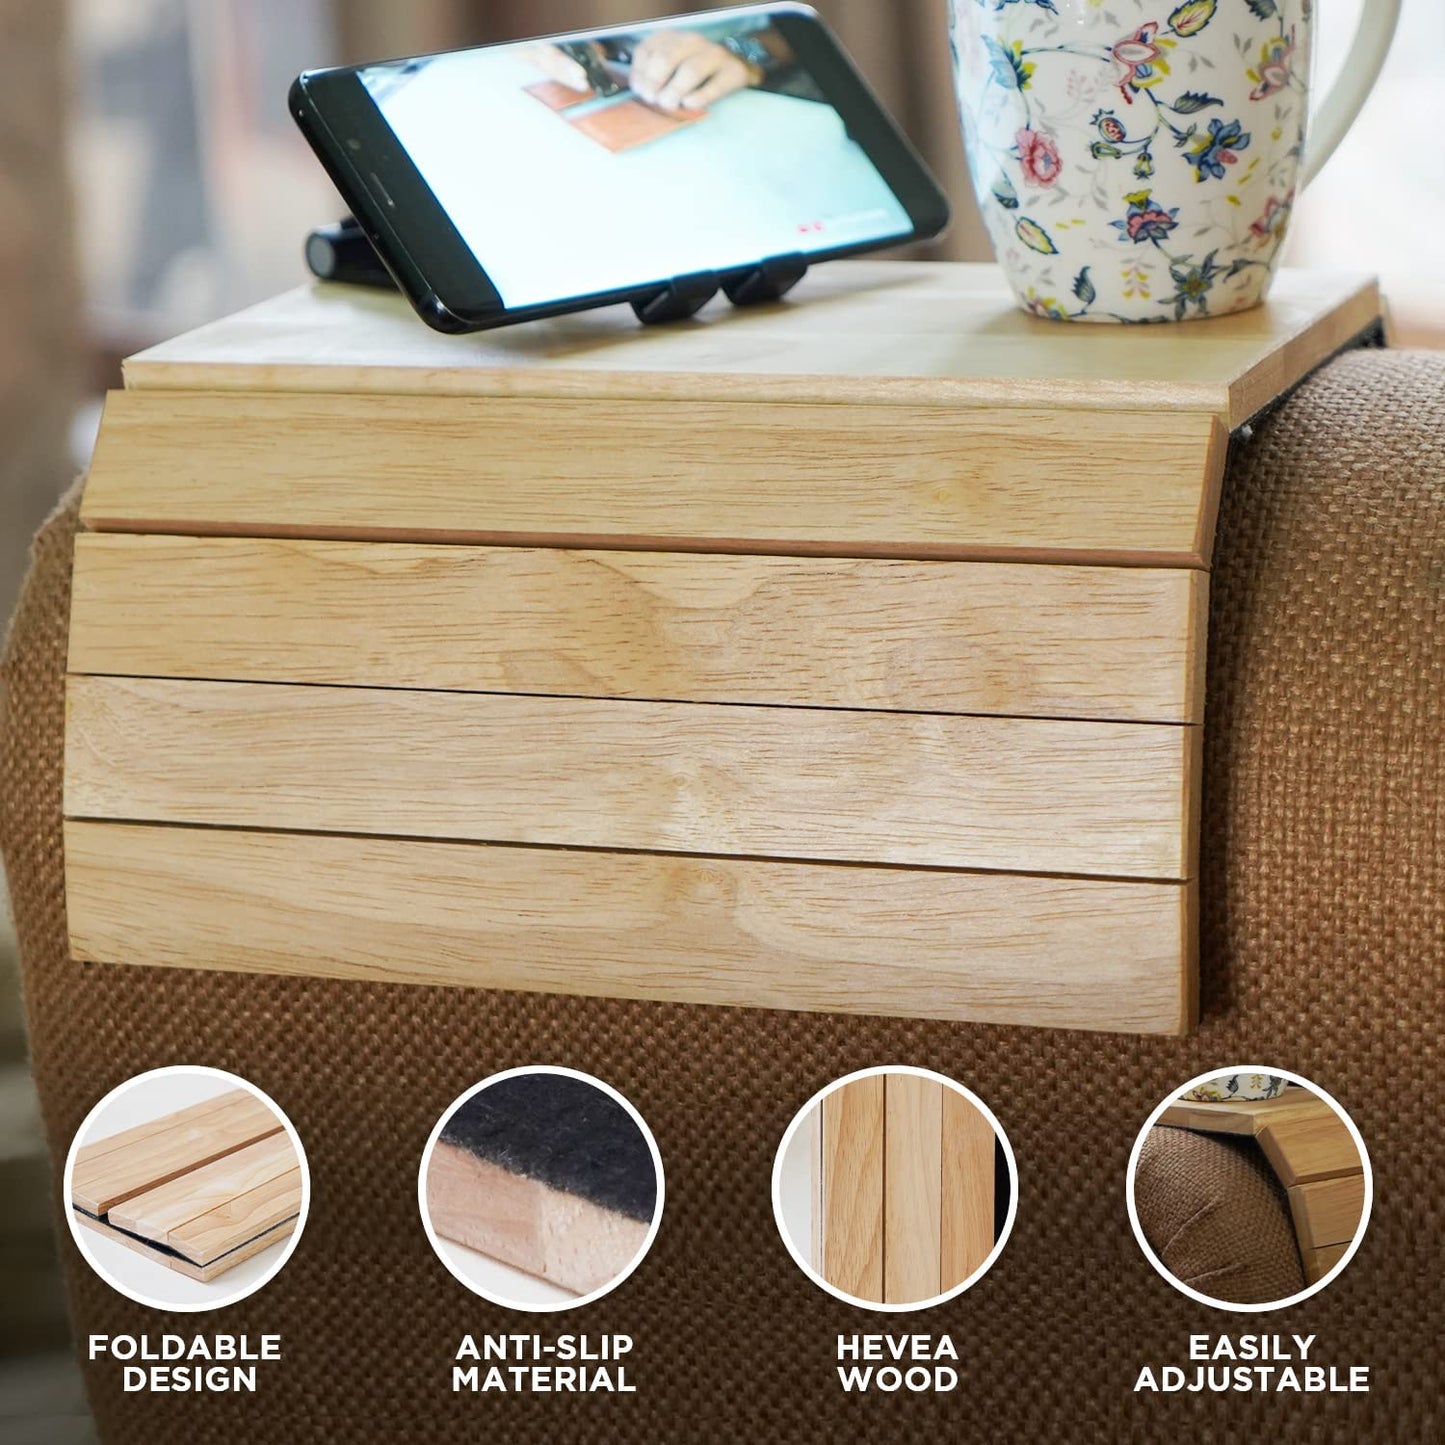 Sofa Arm Tray Foldable Wooden Armrest Tray Sofa Organiser for Drinks, Snack, Magazine, and Remote - Square Couch Protector Laptop and Tablet Holder